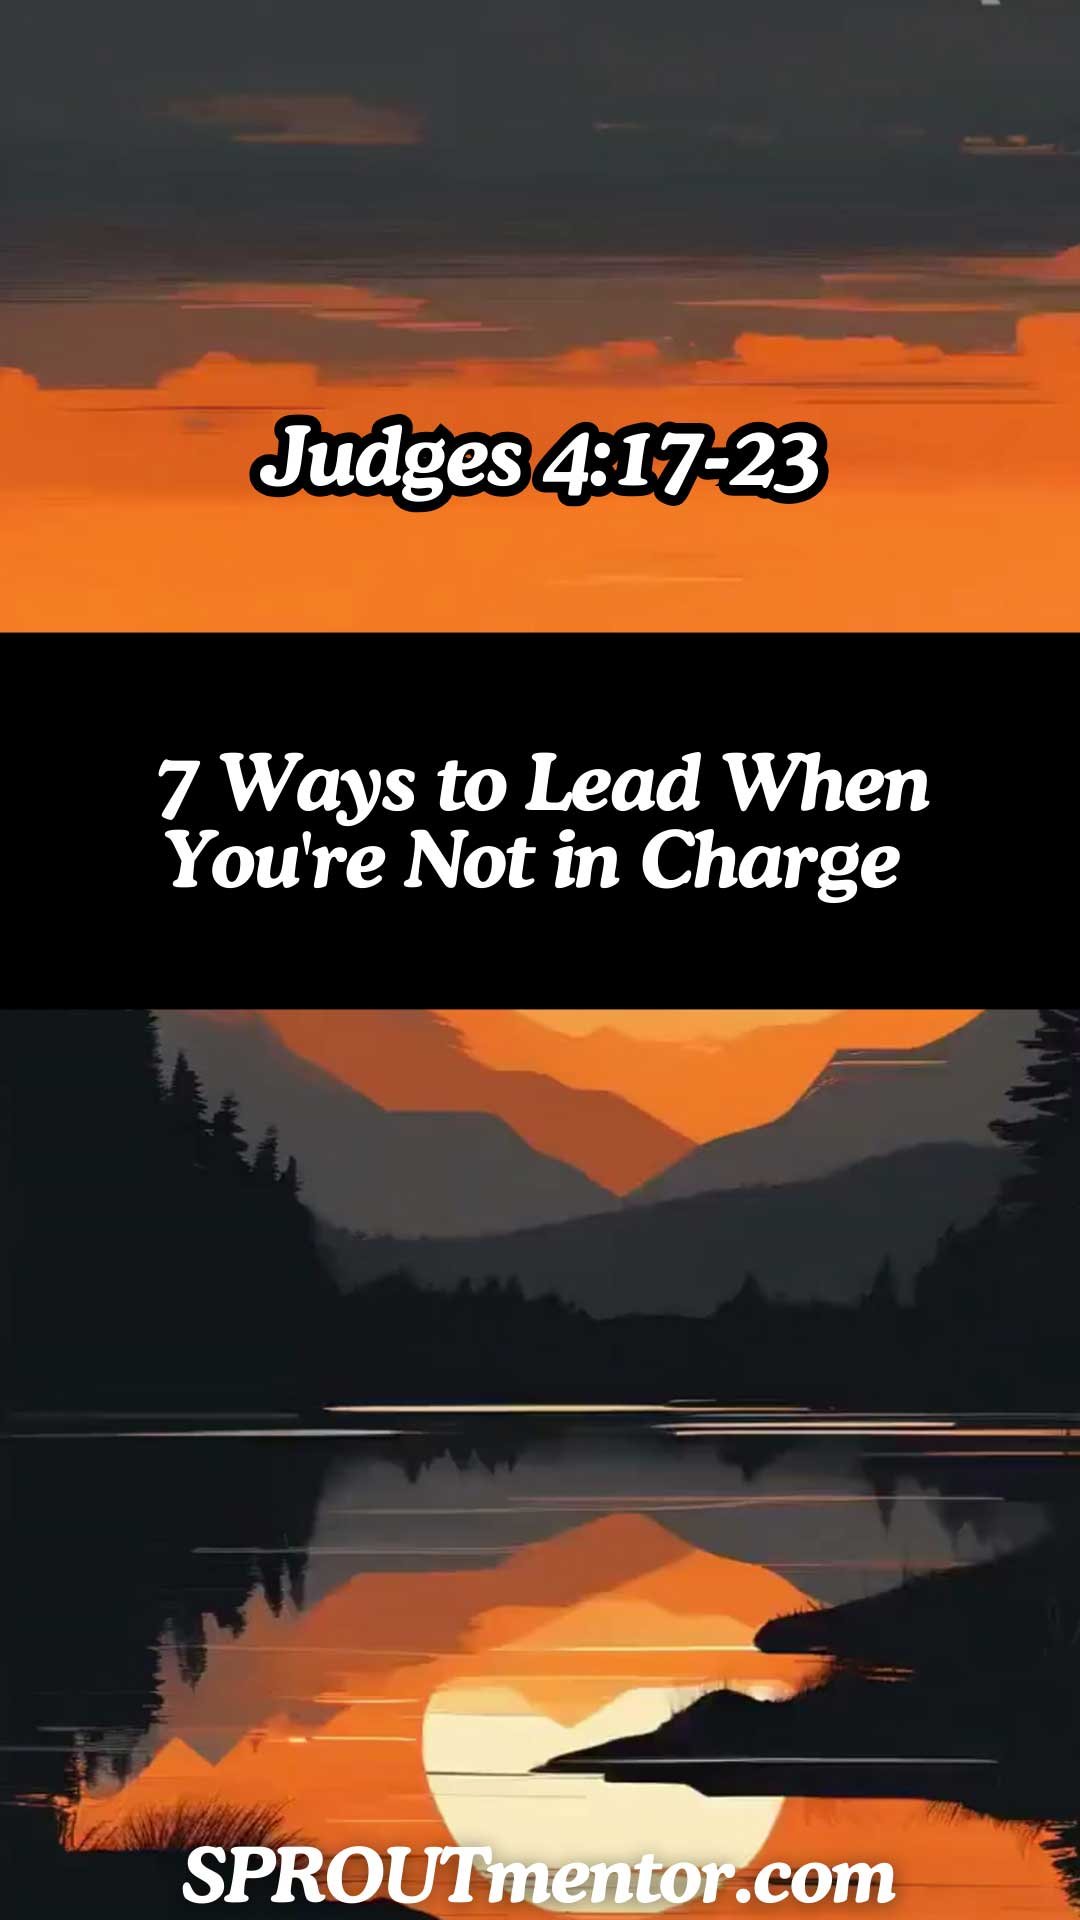 7 Ways to Lead When You’re Not in Charge [Judges 4:17-23]